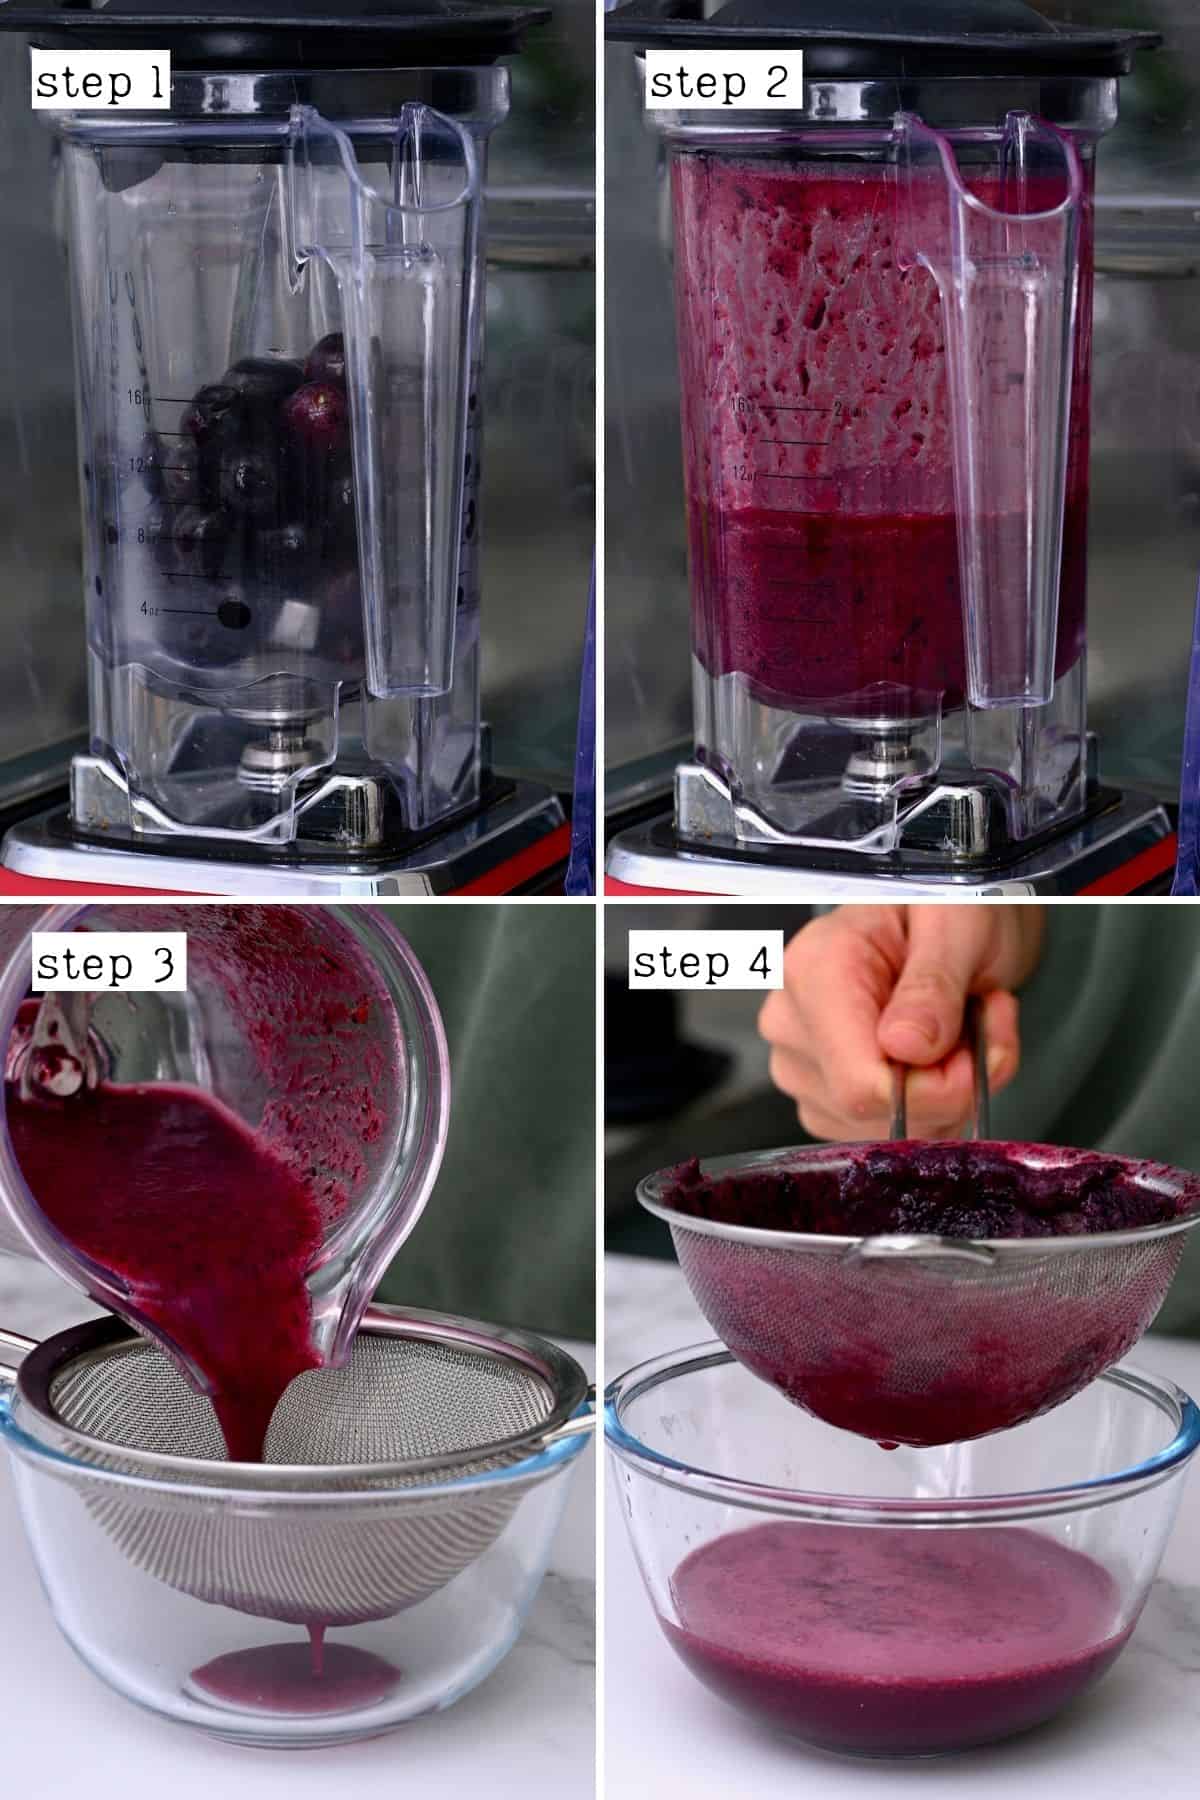 https://www.alphafoodie.com/wp-content/uploads/2022/03/How-to-Make-Grape-Juice-Steps-for-making-grape-juice-with-a-blender.jpeg